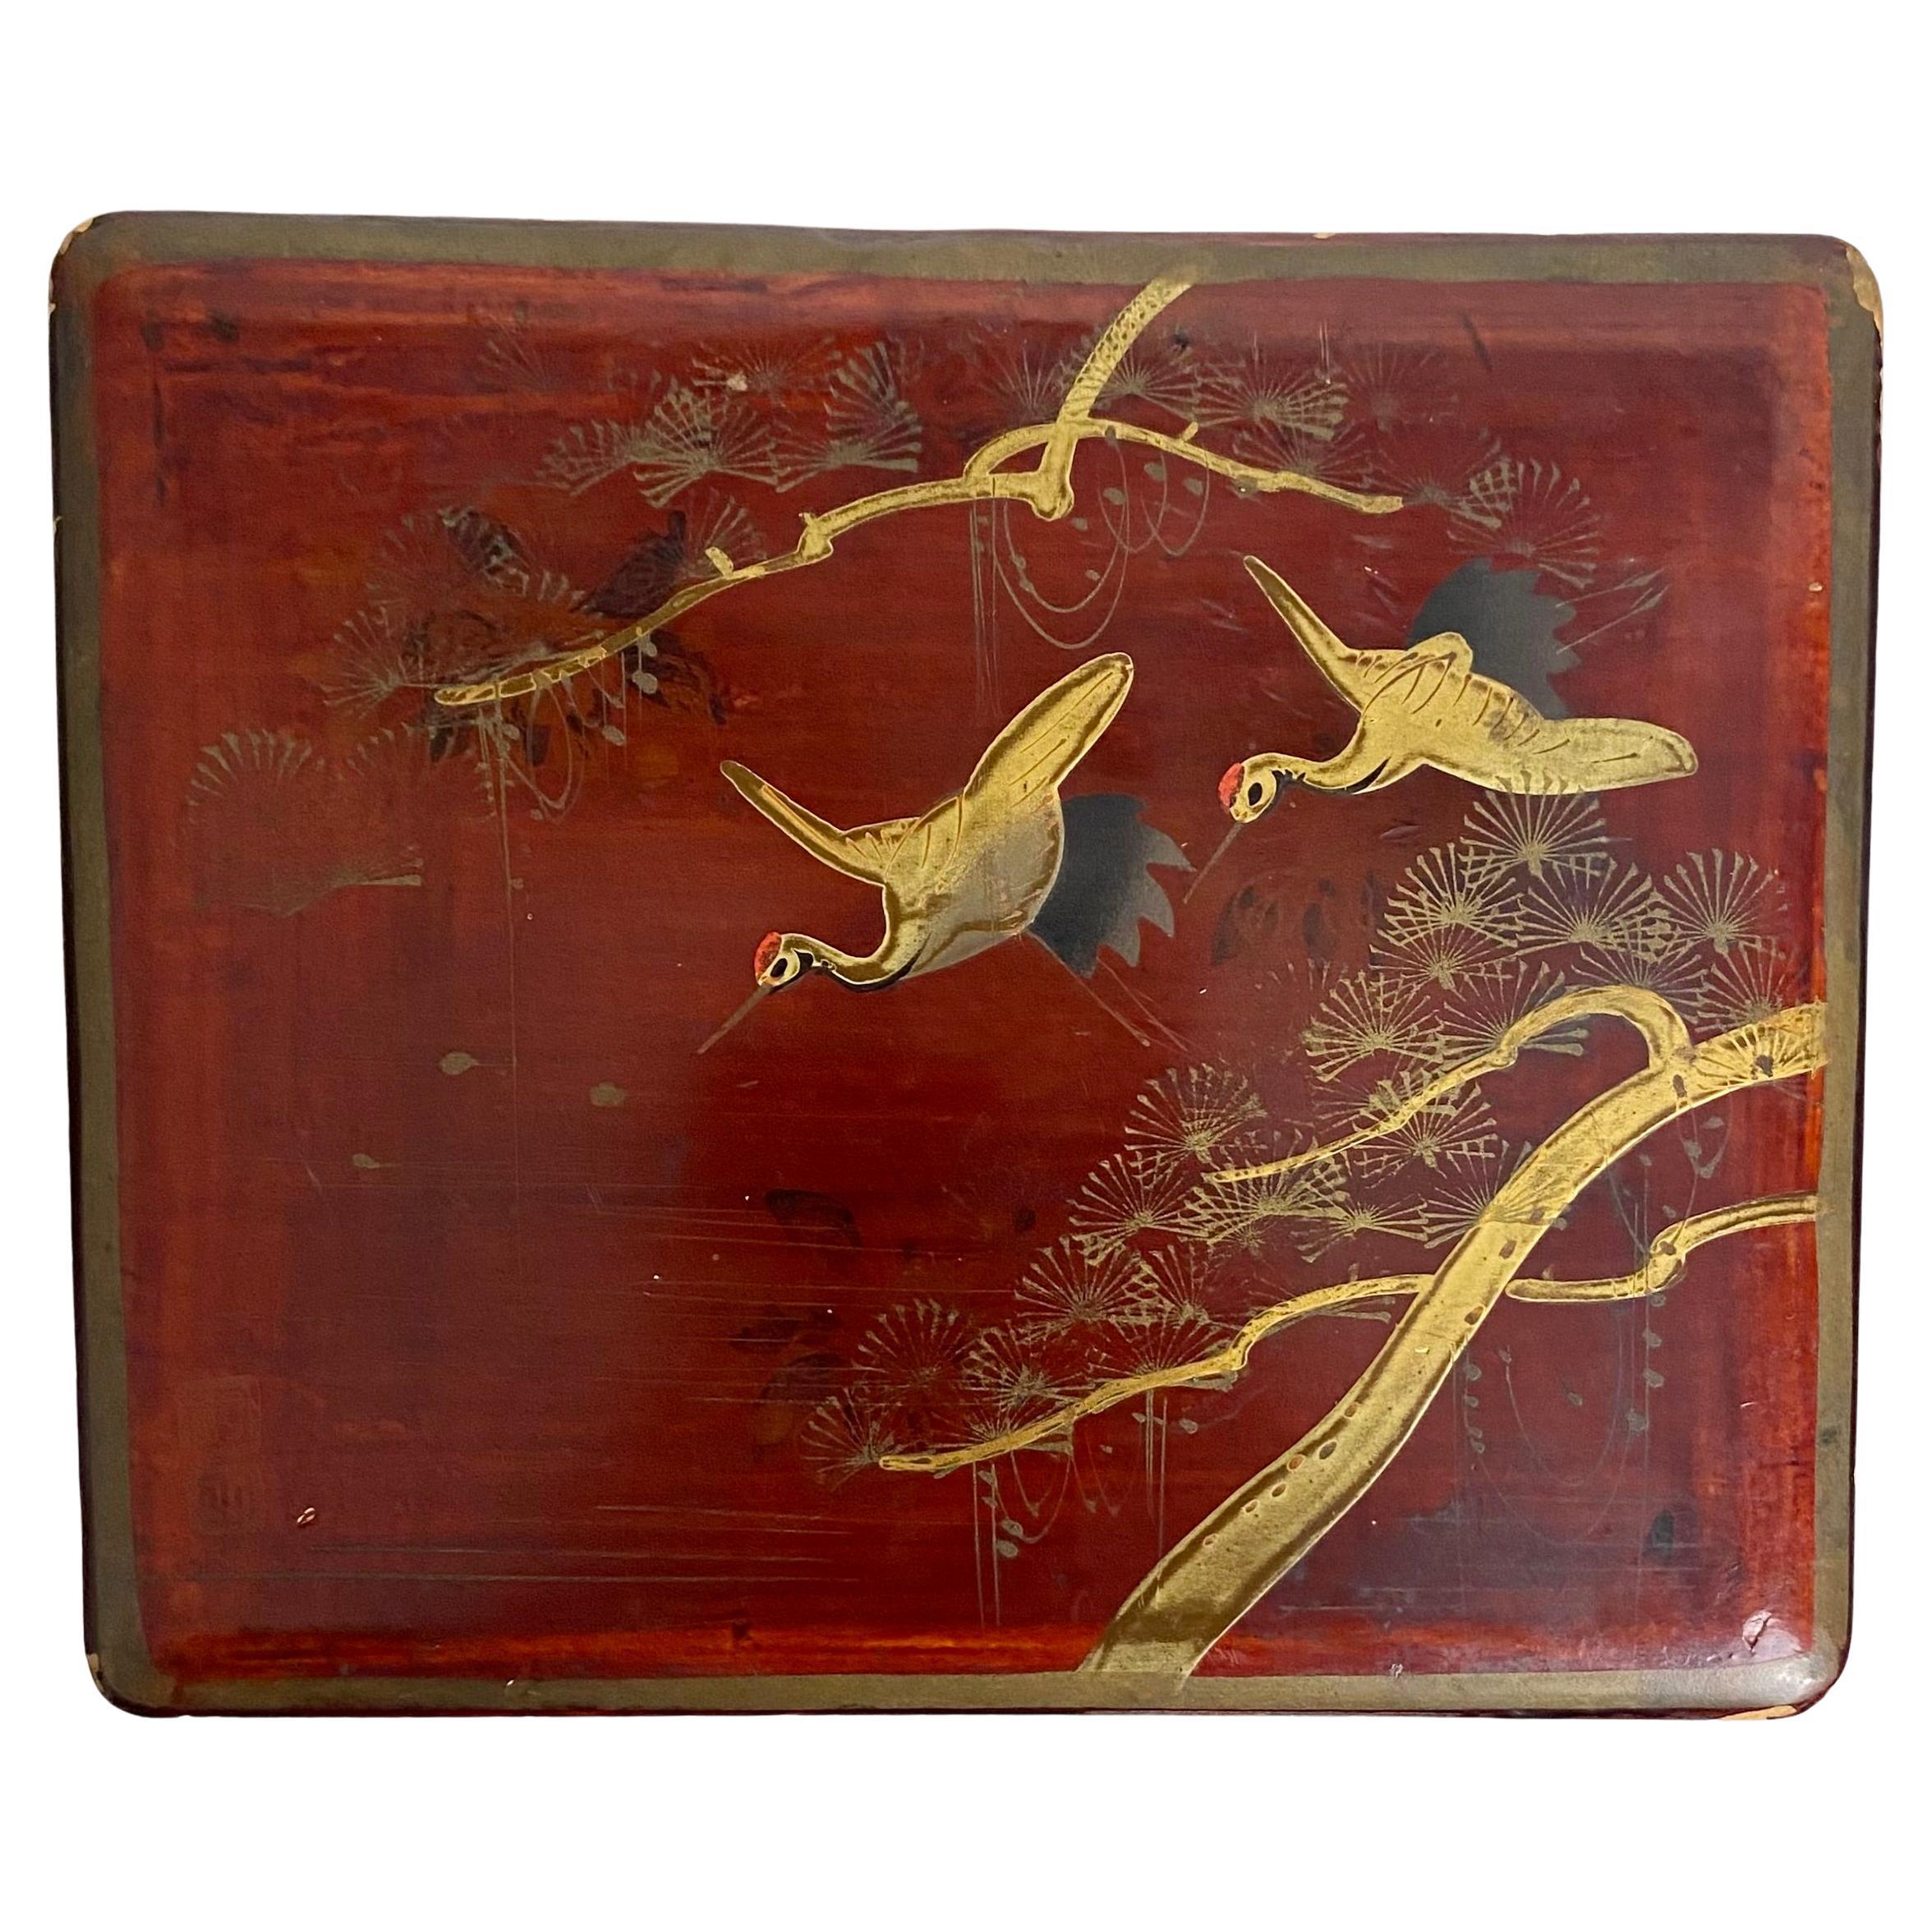 Beautiful Japanese box in red lacquered wood.
The lid is decorated with golden herons and flowering tree branches and signed by the artist. Black flowers are painted around the box.
The inside of the box is covered with a black lacquer paint.
Japan